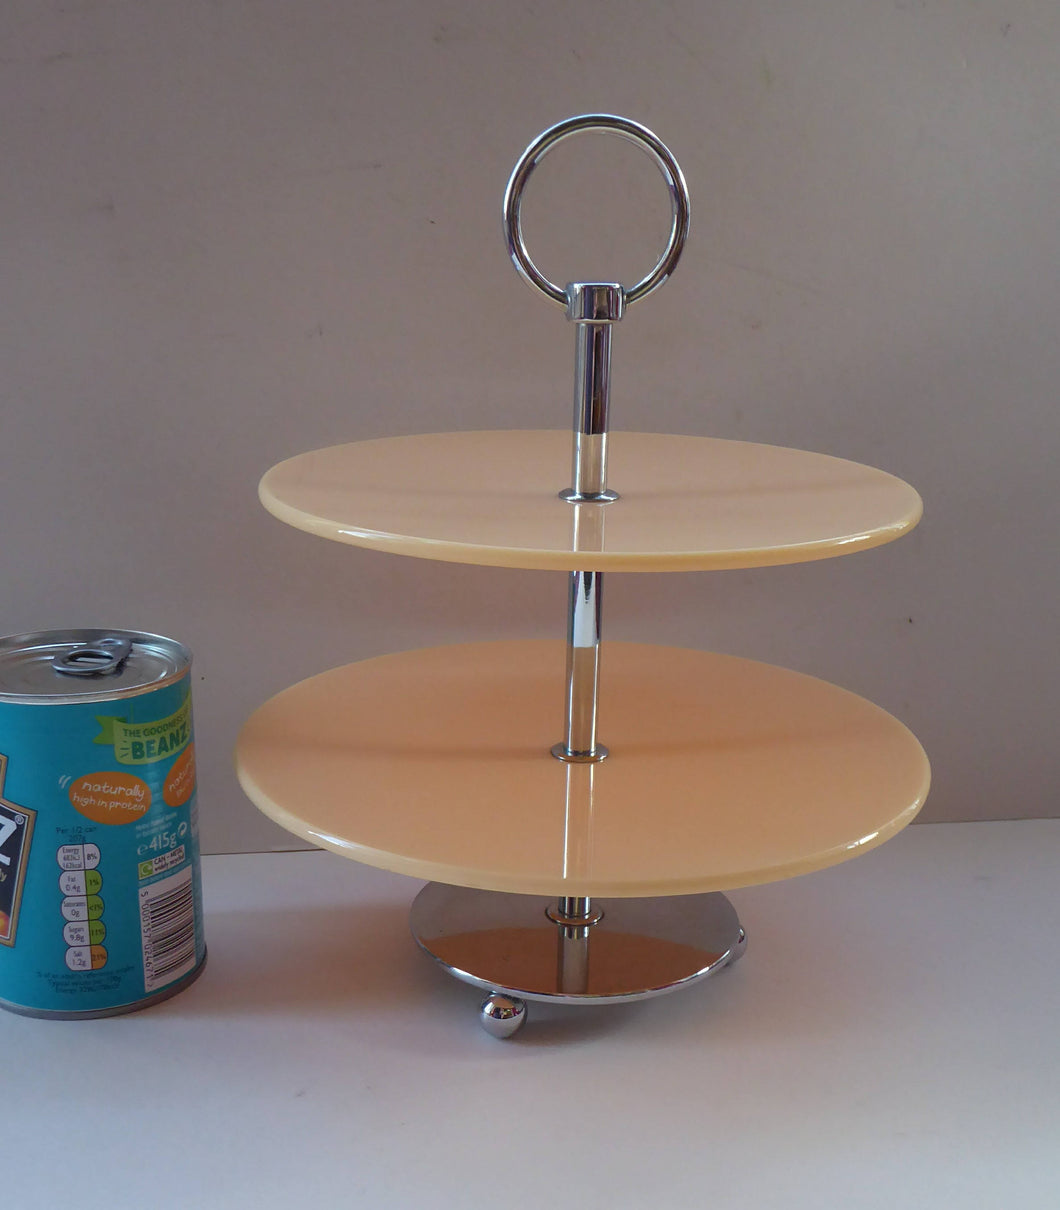 1950s Perspex CAKE STAND Peach Coloured. Art Deco Style with Lucite Plates & Fine Quality Chrome Base, Stand and Carrying Handle. Two Tiers